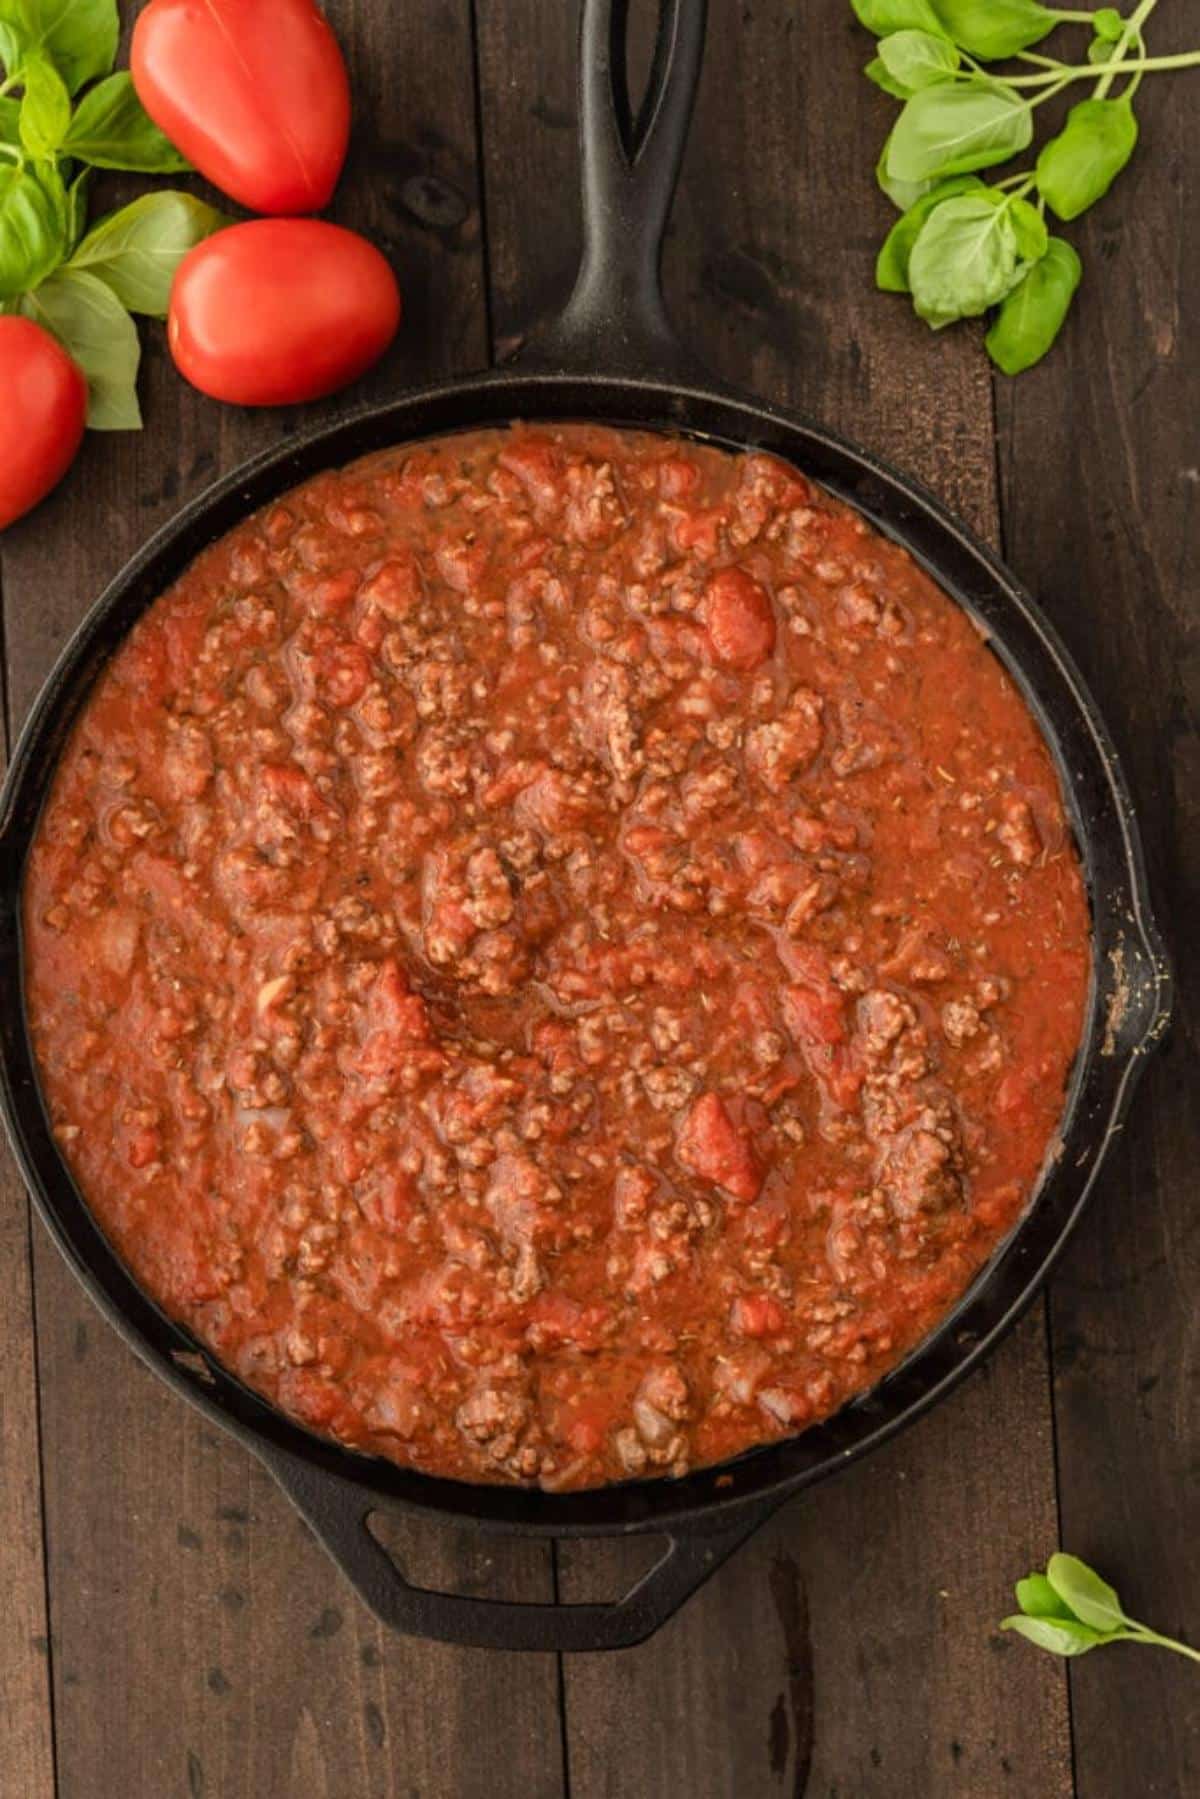 Ground beef and tomatoes in cast iron skillet.